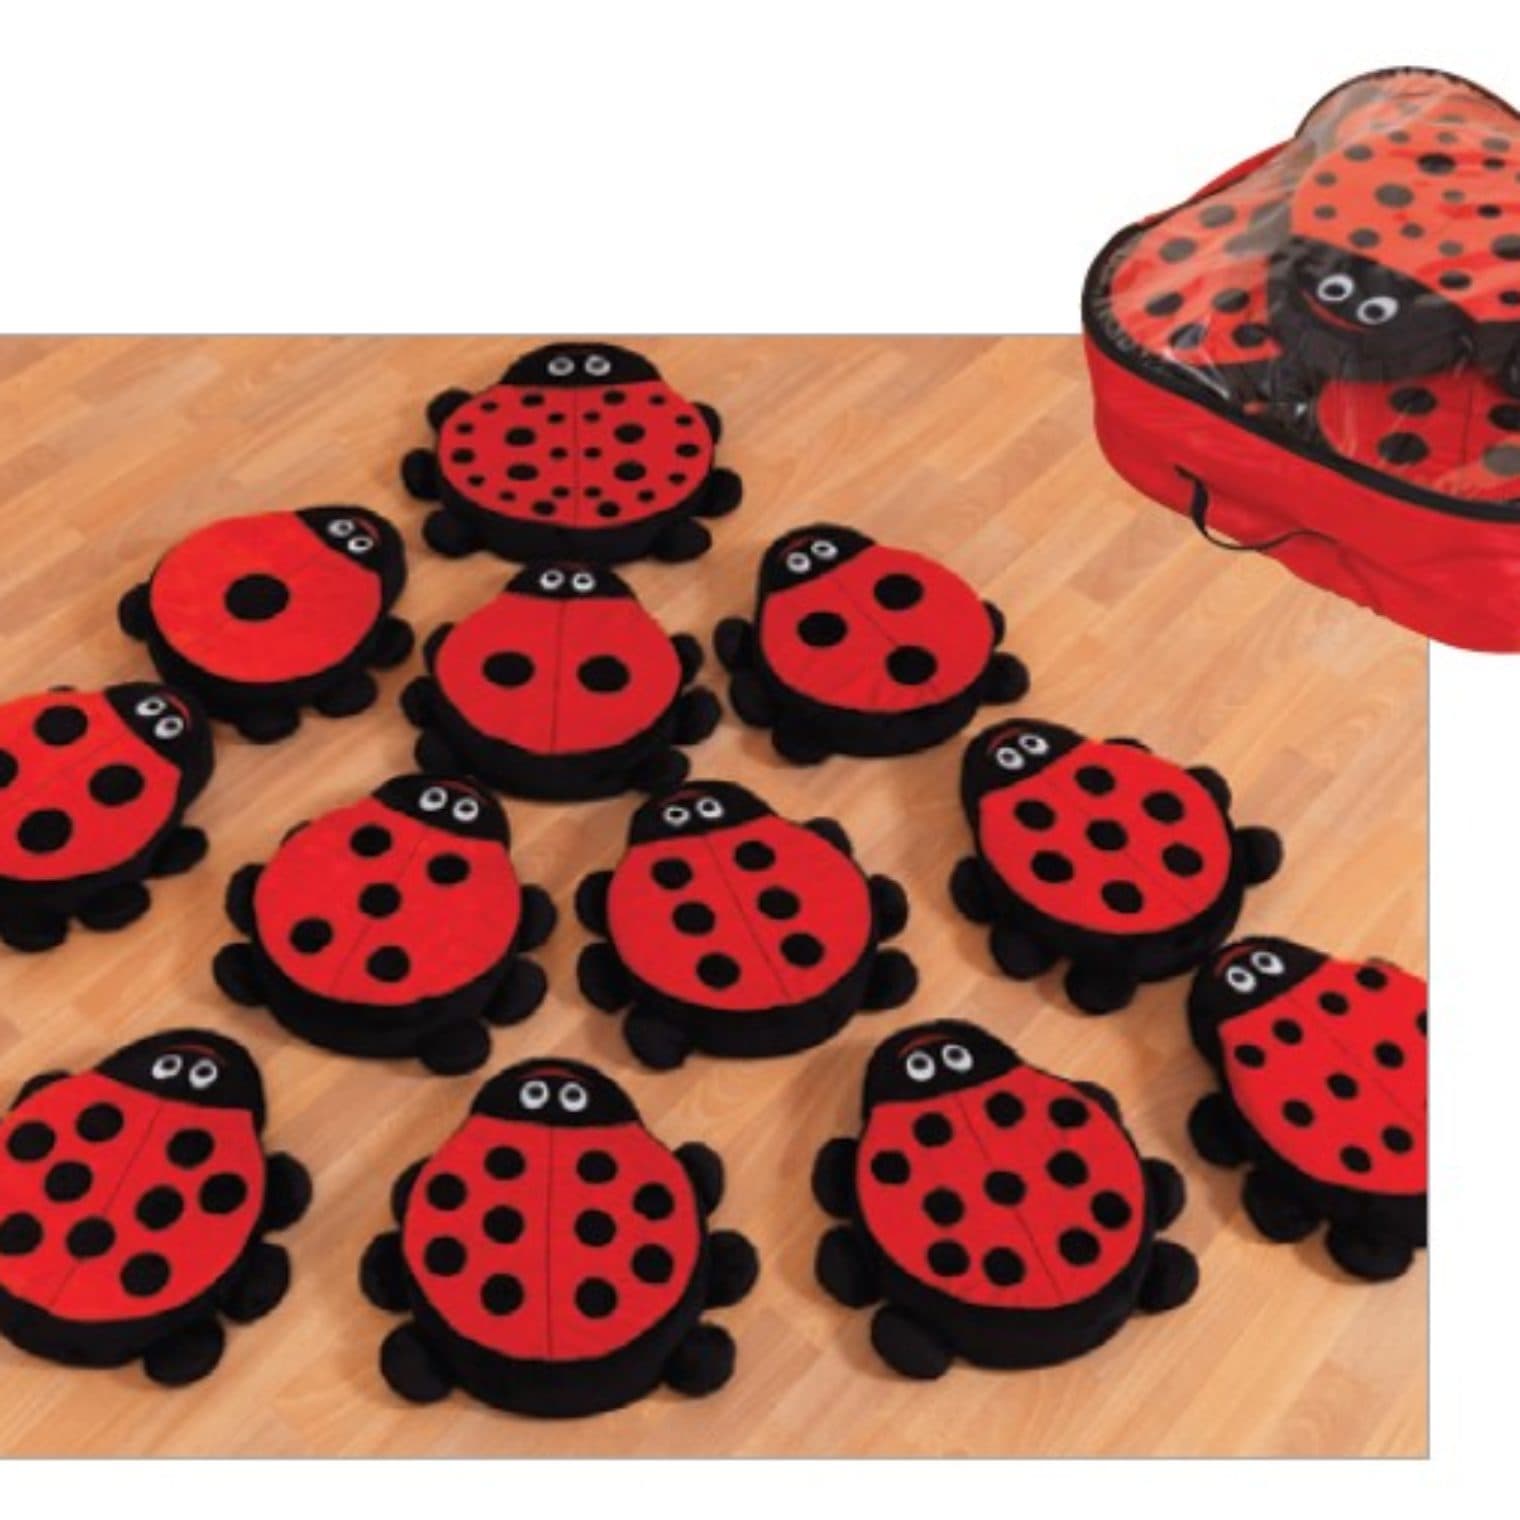 Ladybird counting cushions